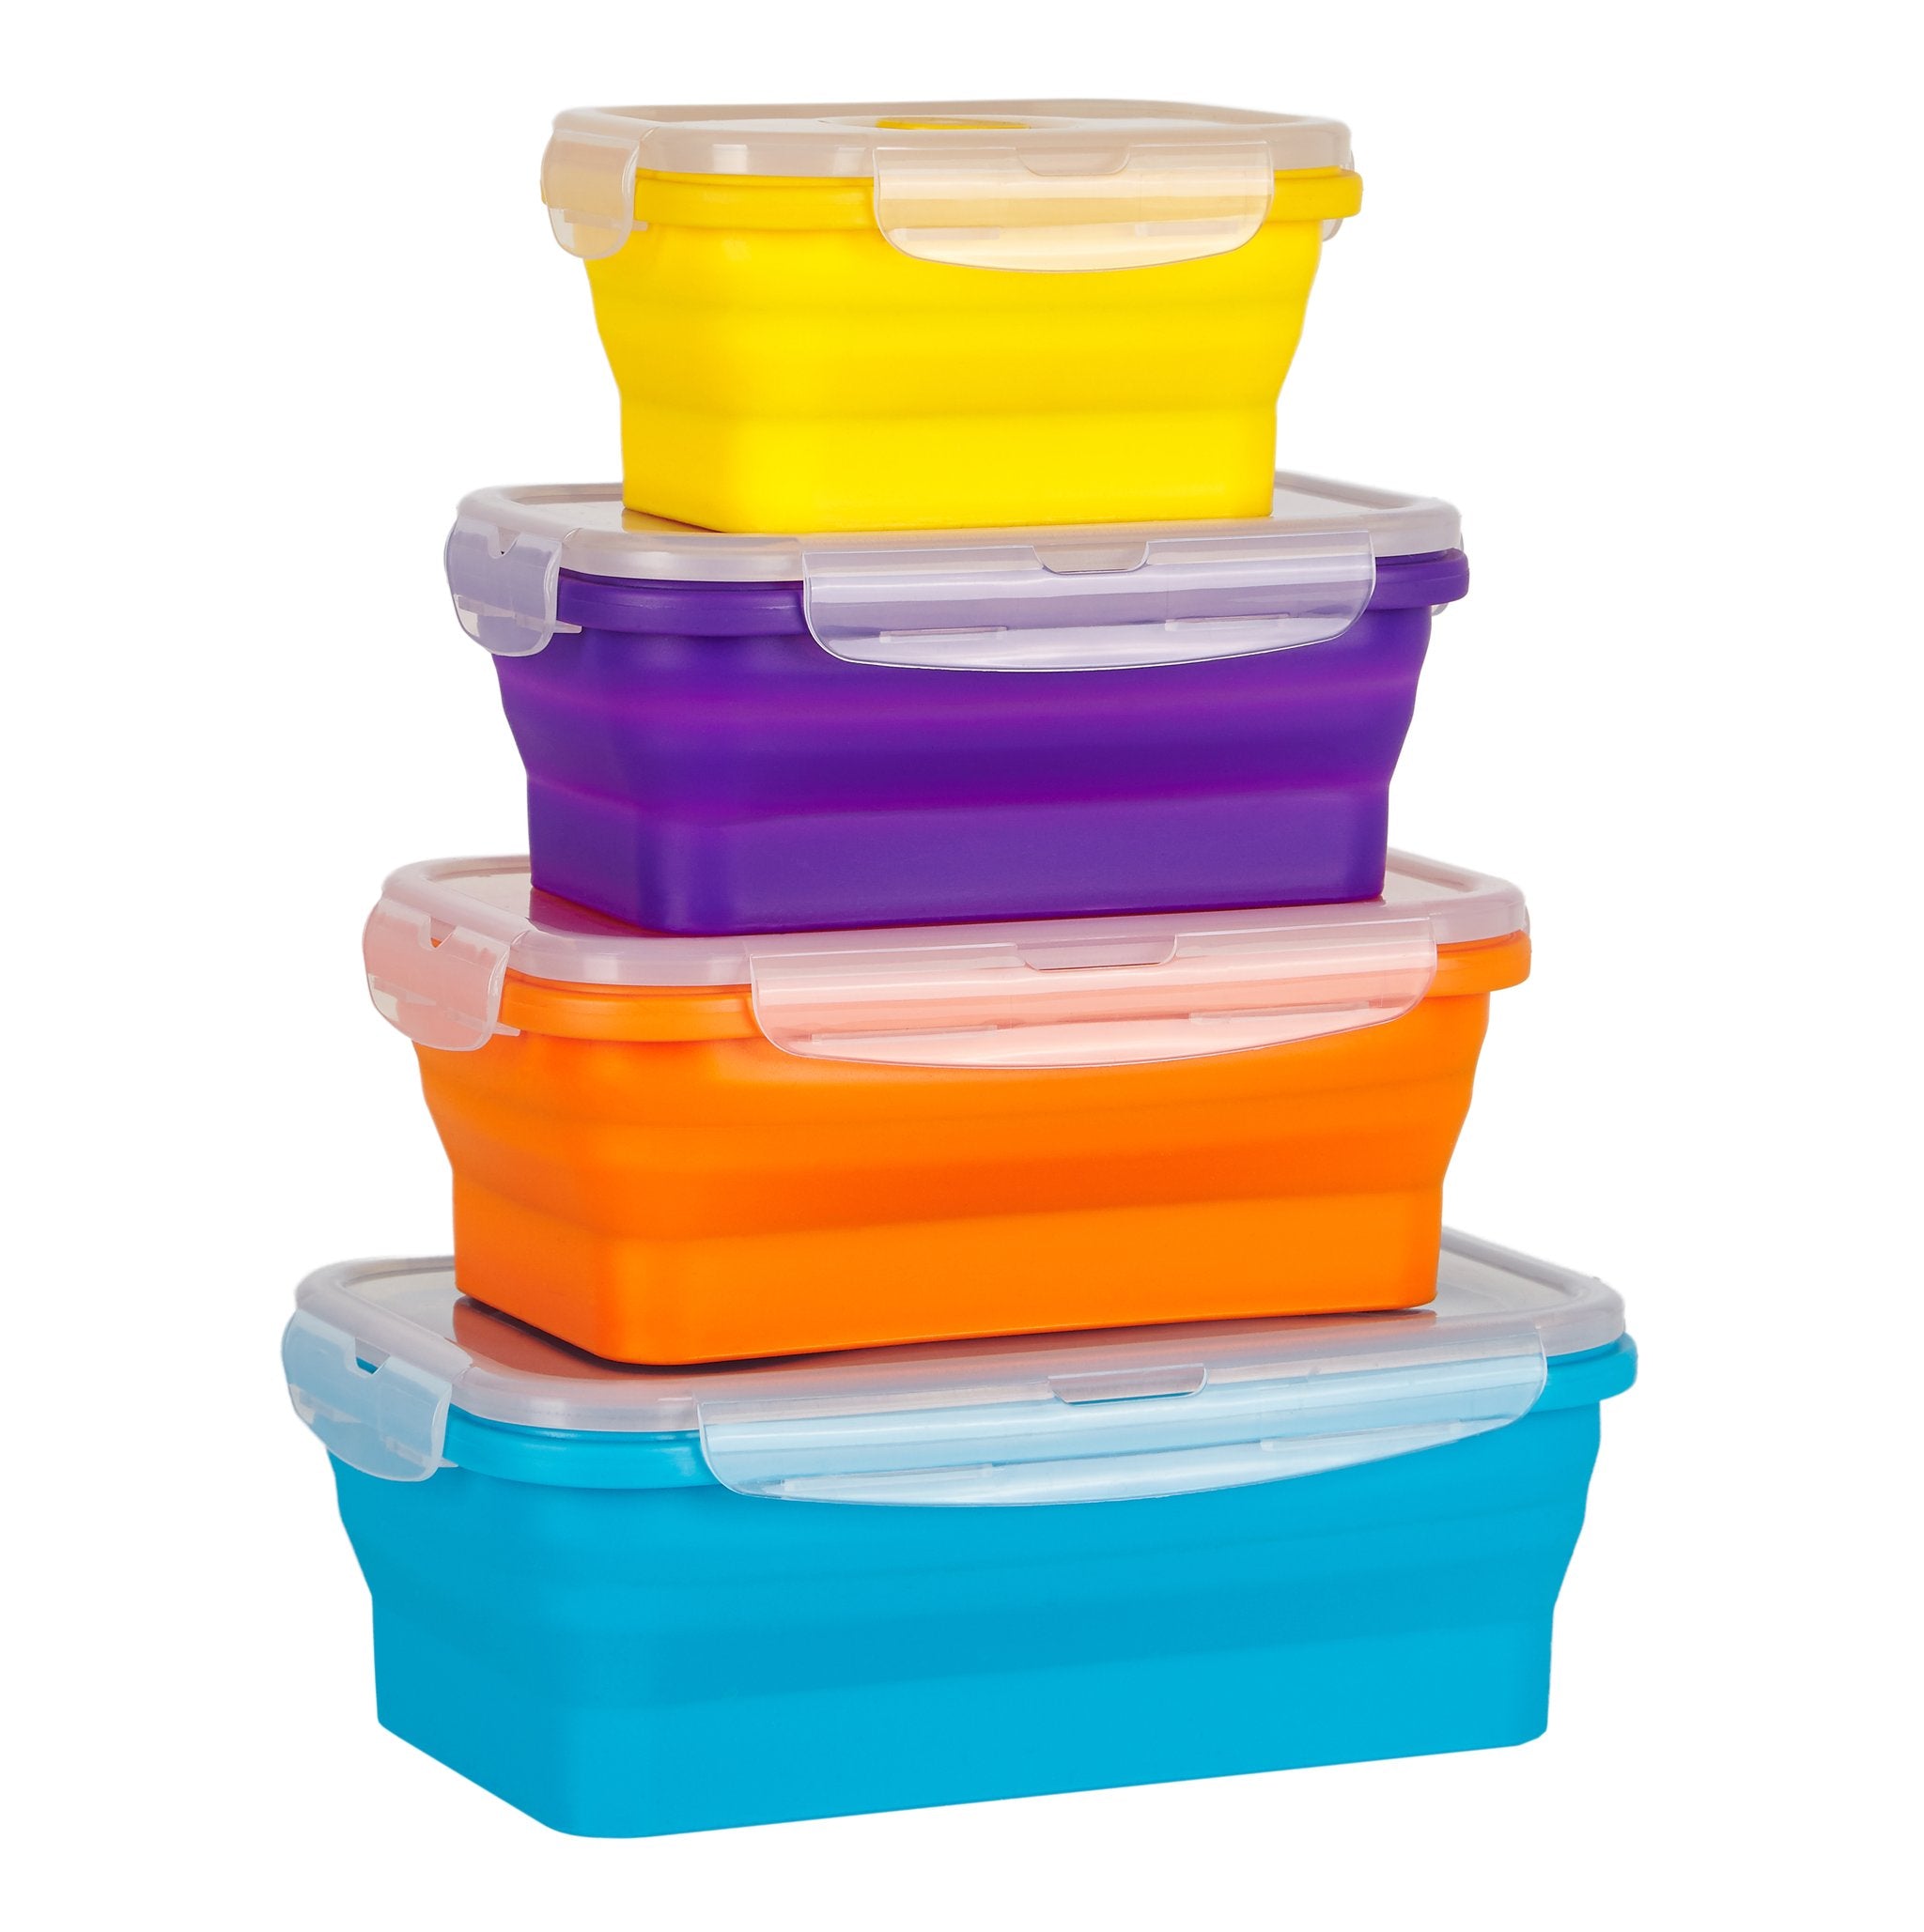 Set of 4 Collapsible Silicone Food Storage Containers, Collapsible Bowls  with Airtight Lids, Flat Stacks, Meal Prep, Lunch Box Container, RV